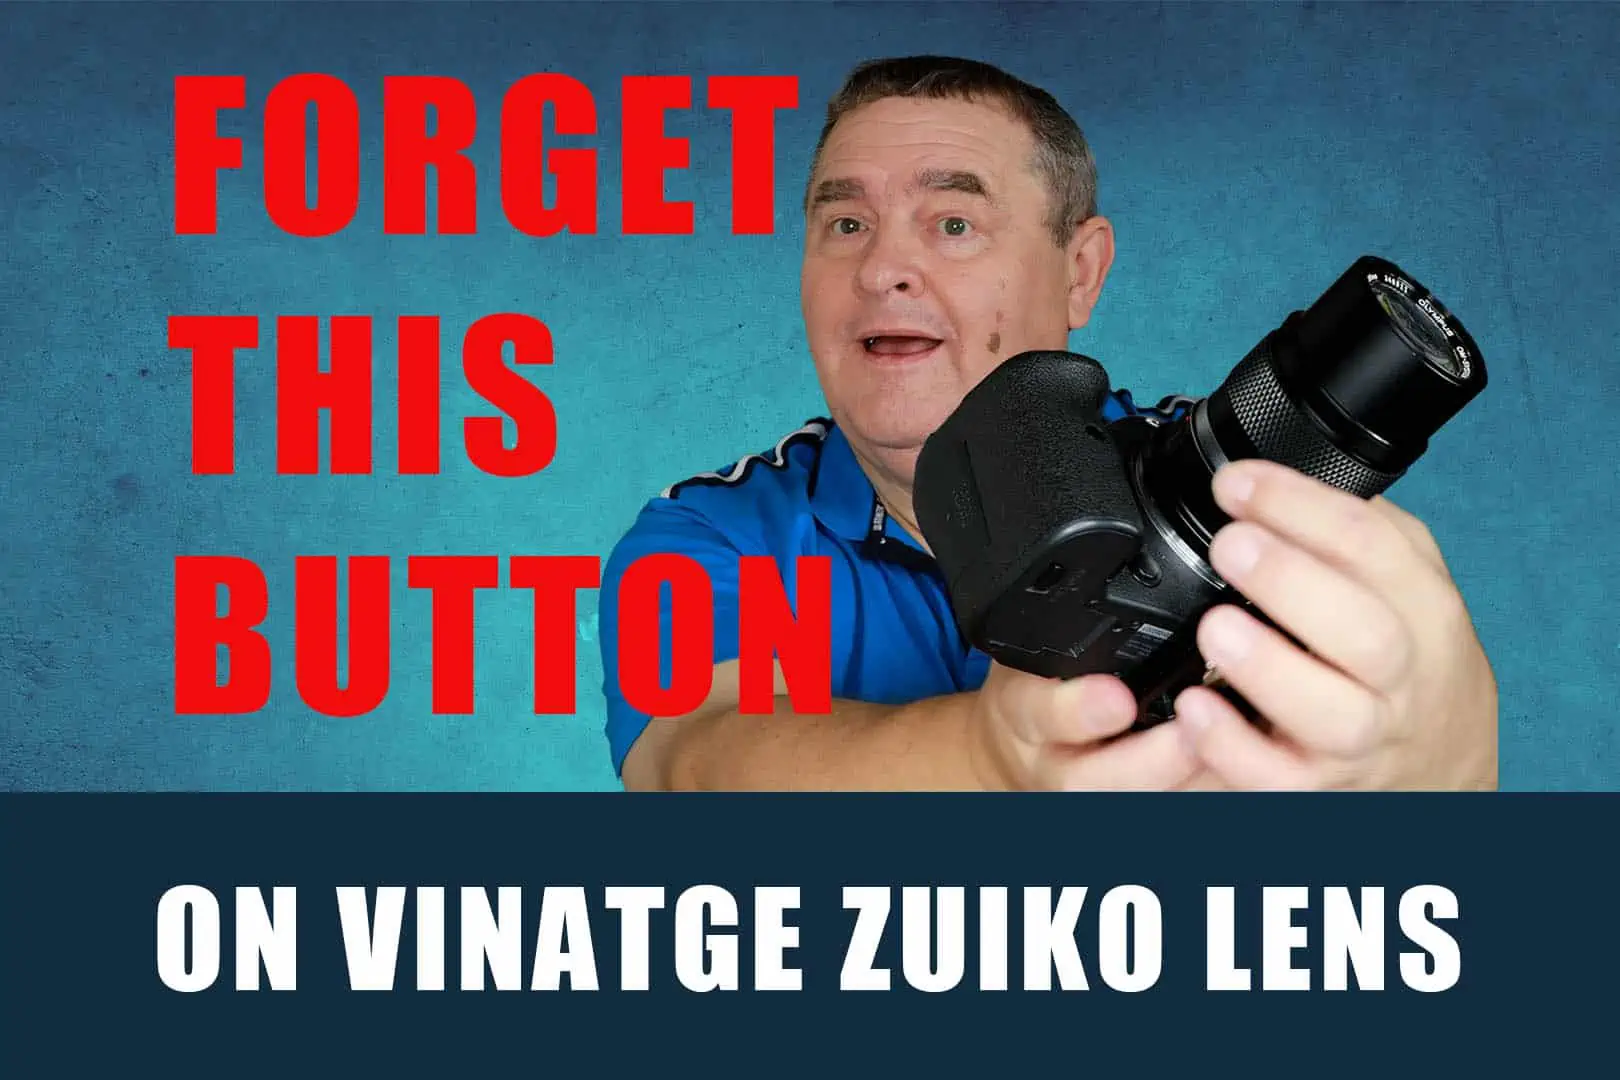 Vintage Zuiko lenses on an EOS R Camera - Do You Use the DOF Button Featured Image